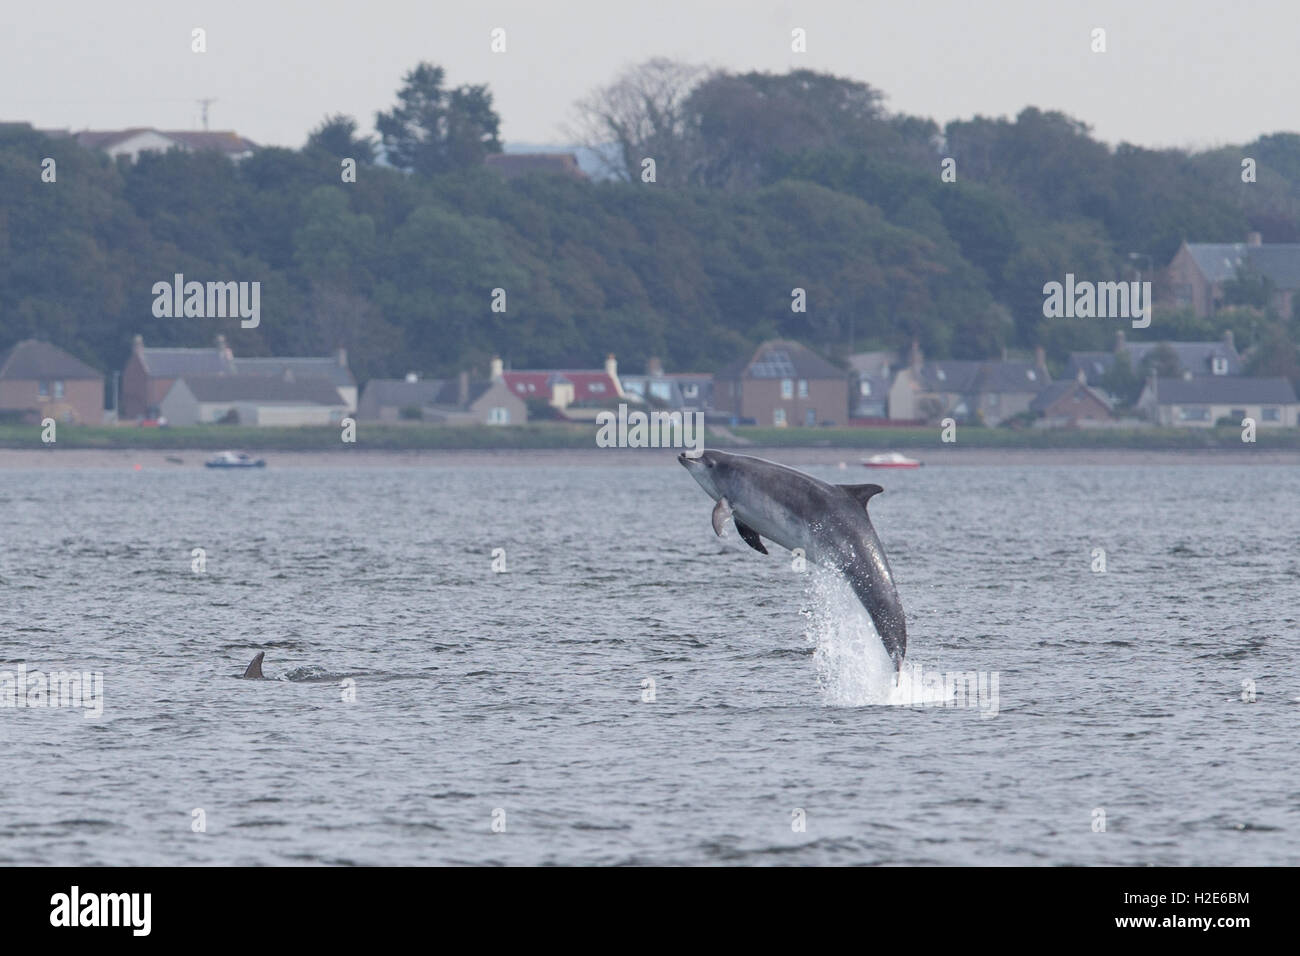 Bottlenose dolphin breaching in the Moray Firth Stock Photo